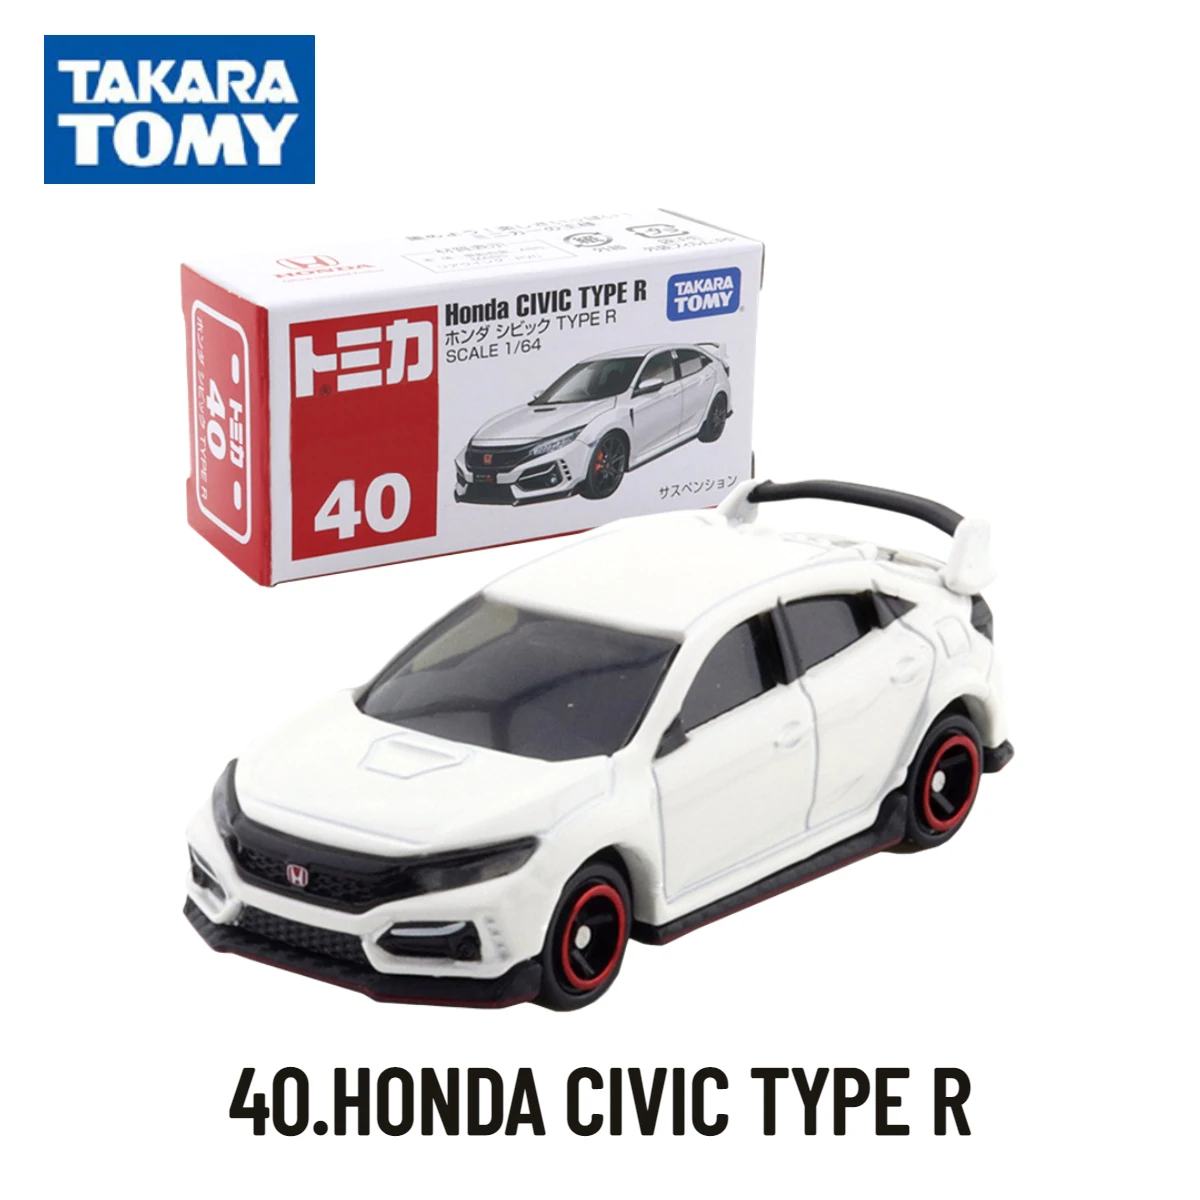 

Takara Tomy Tomica Classic 31-60, HONDA CIVIC TYPE R Scale Car Model Replica Collection, Kids Xmas Gift Toys for Boys